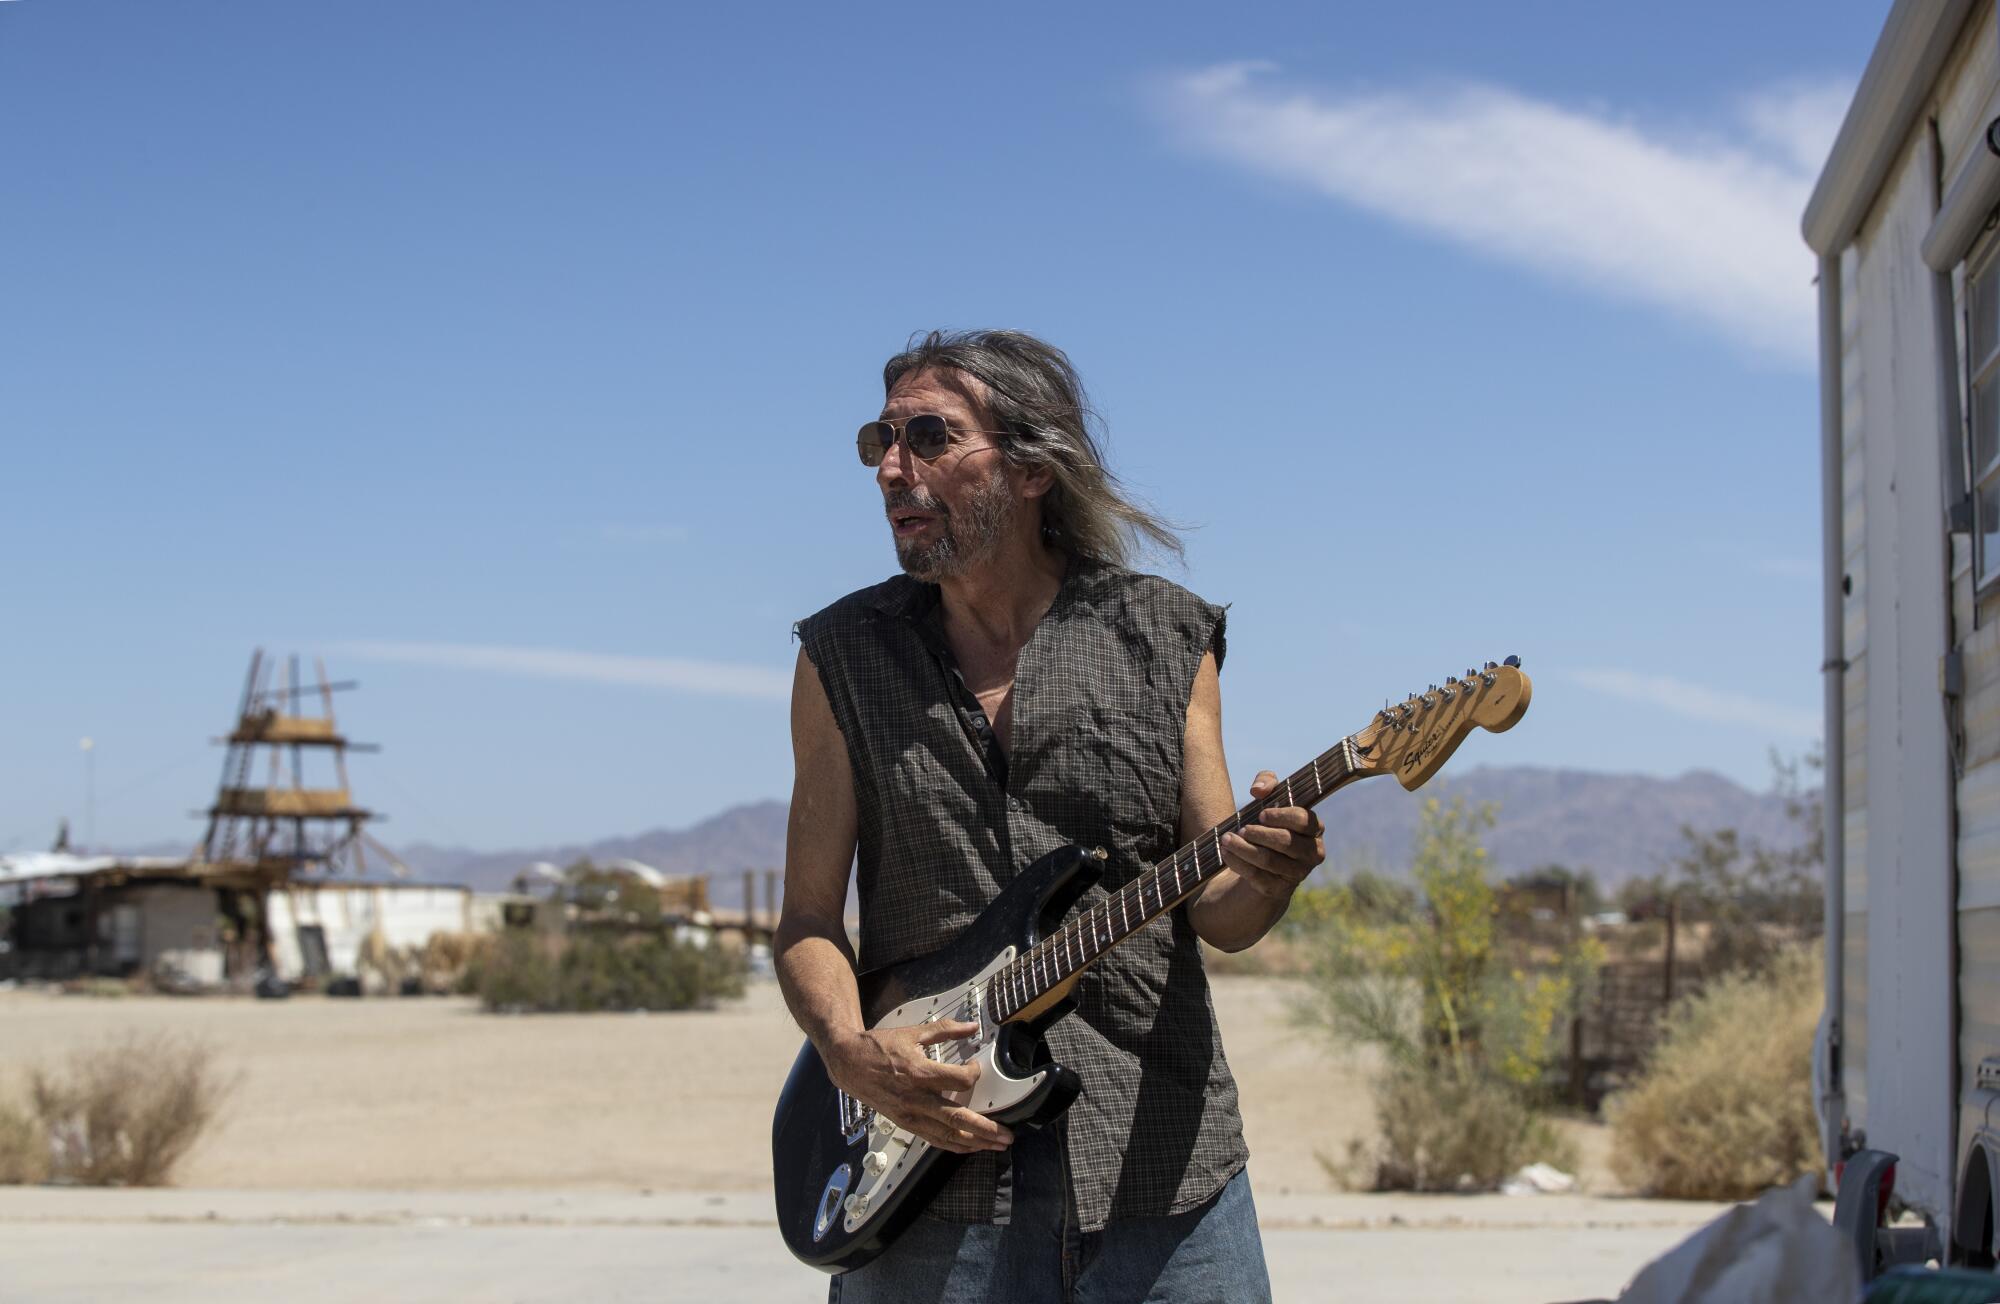 A man with long hair holds a Fender Stratocaster style electric guitar outside in the desert